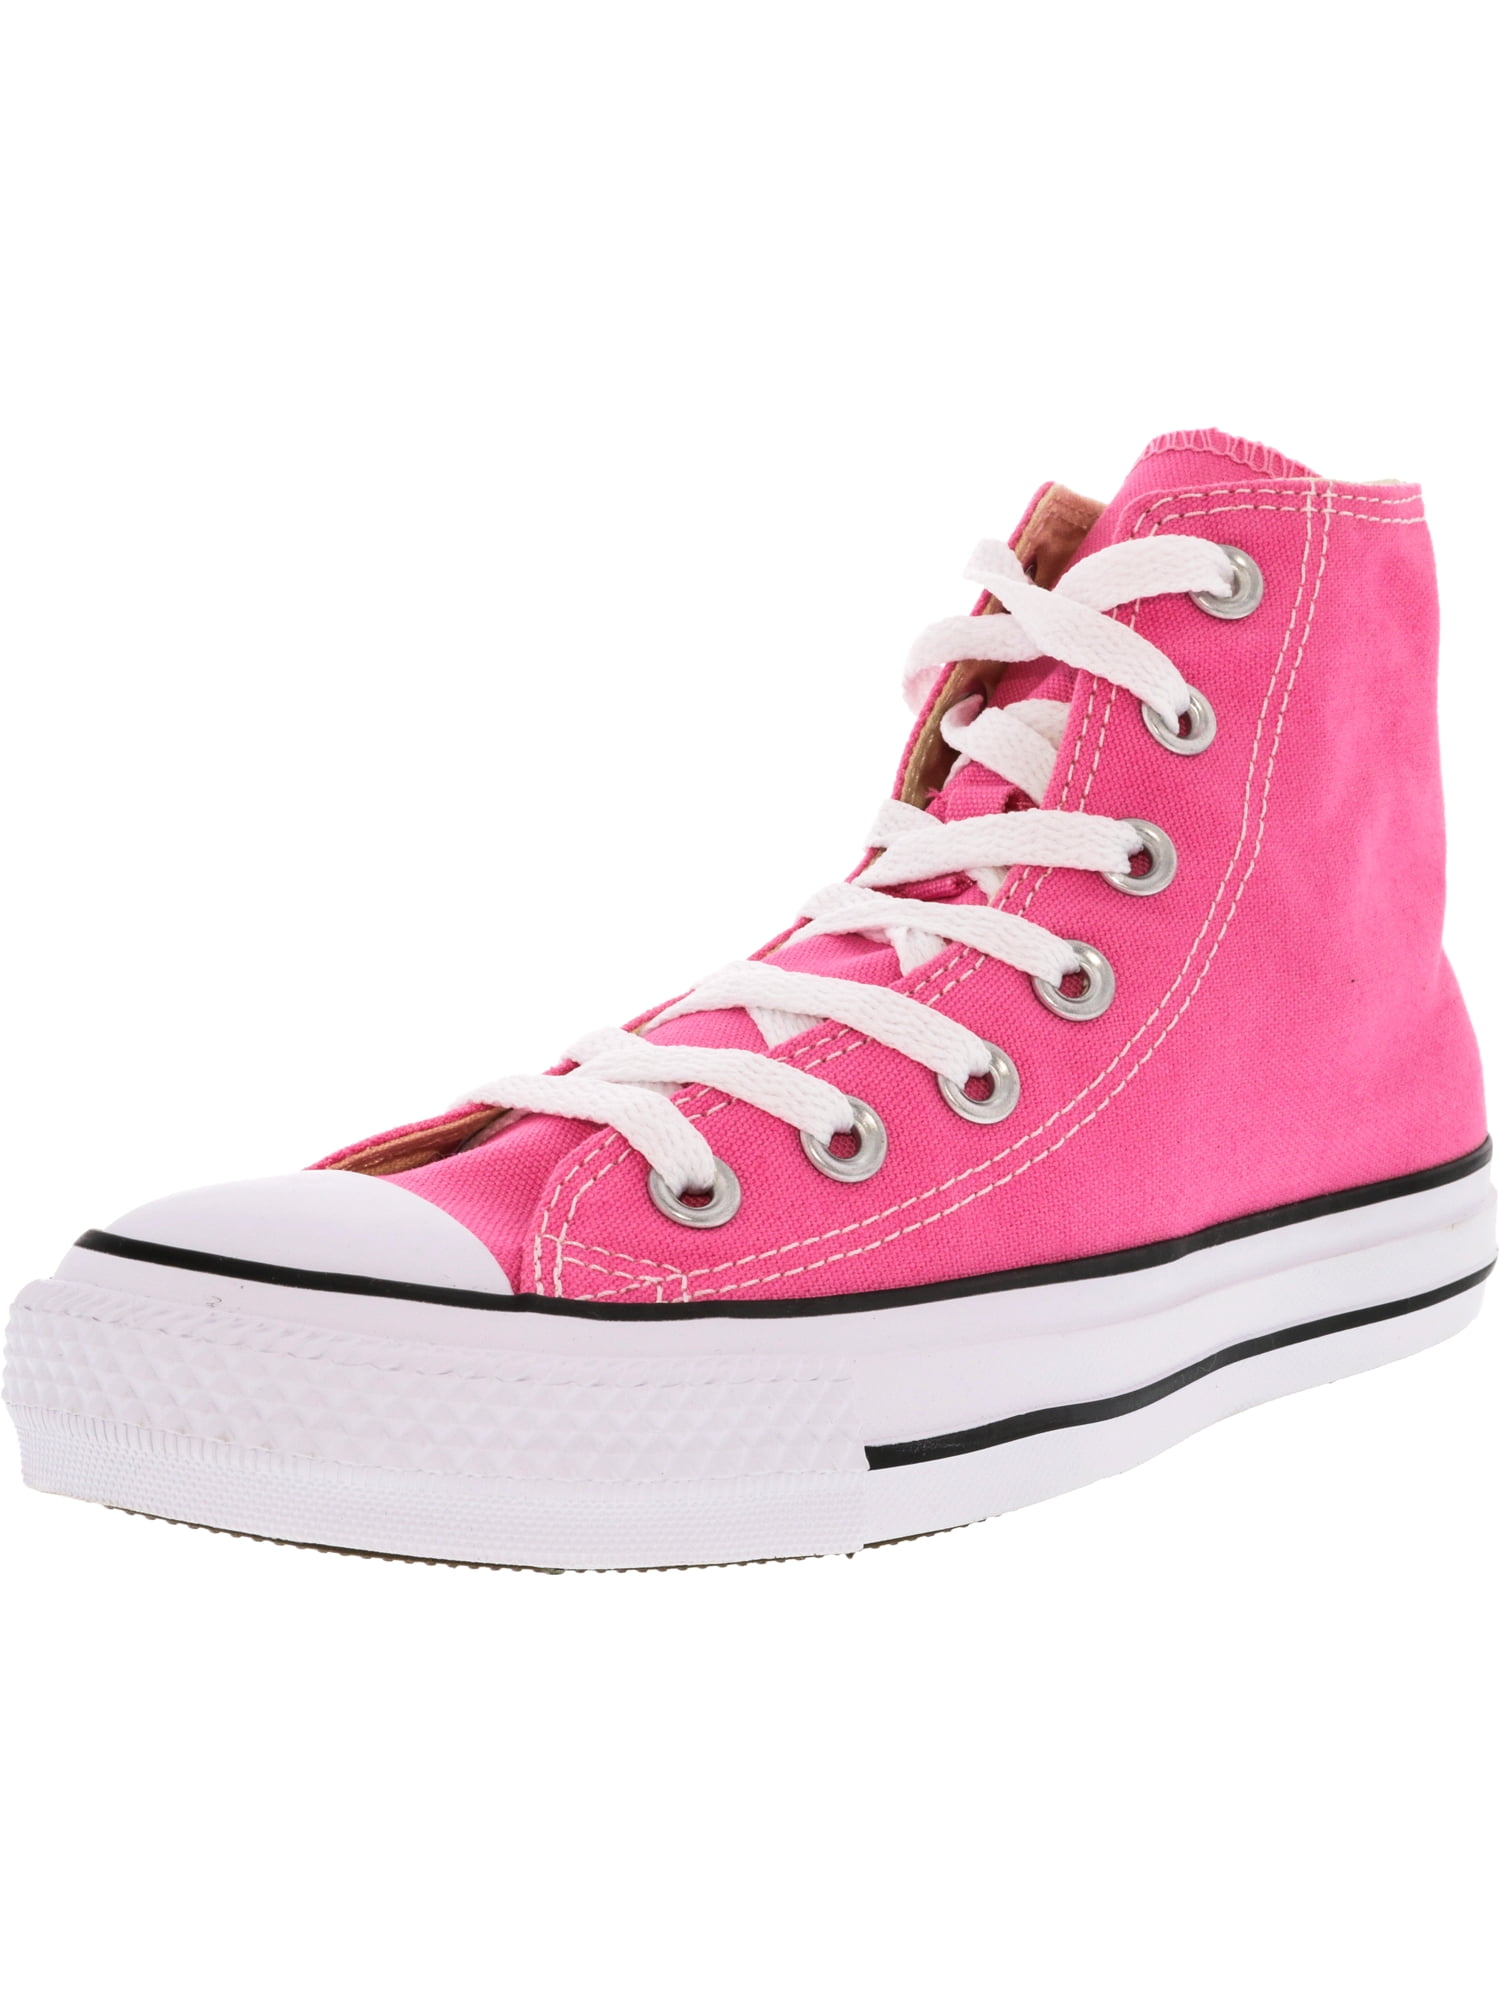 mens pink converse size 12